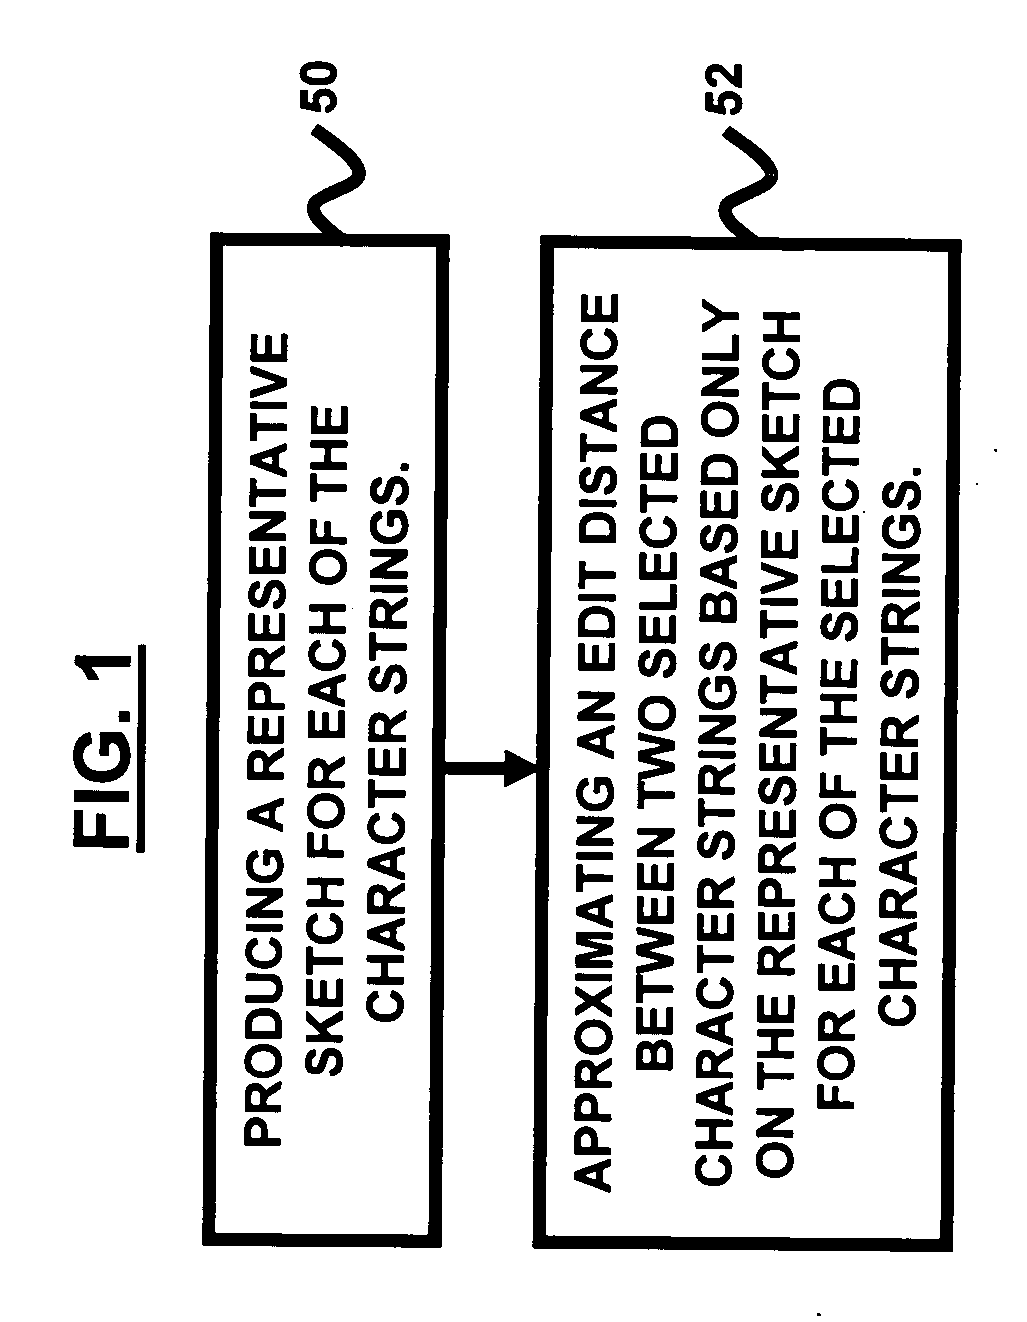 System and method for detecting matches of small edit distance